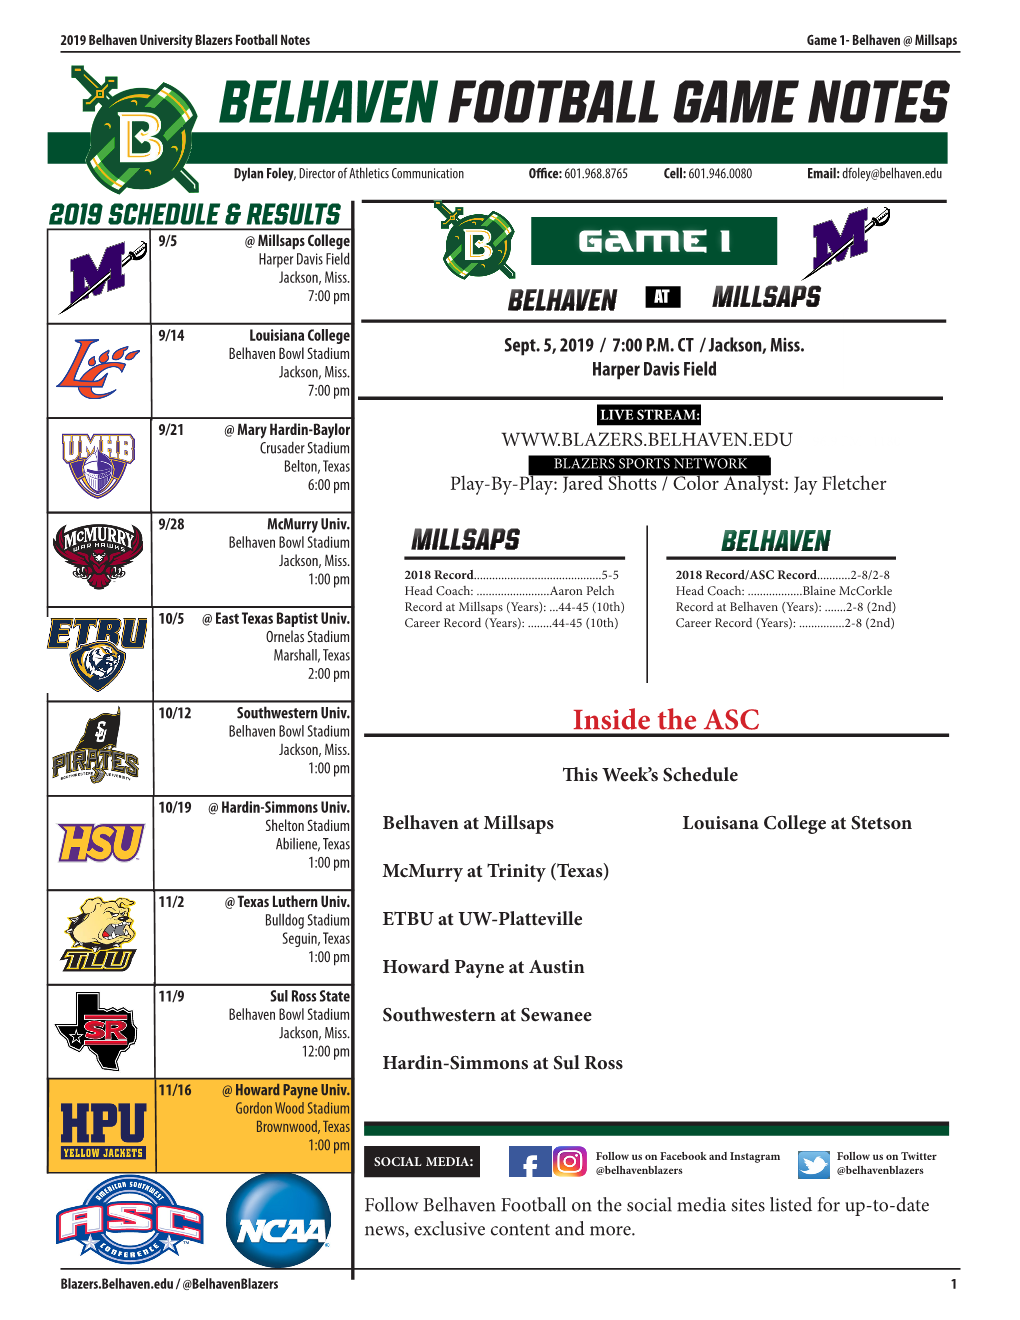 BELHAVEN FOOTBALL Game NOTES